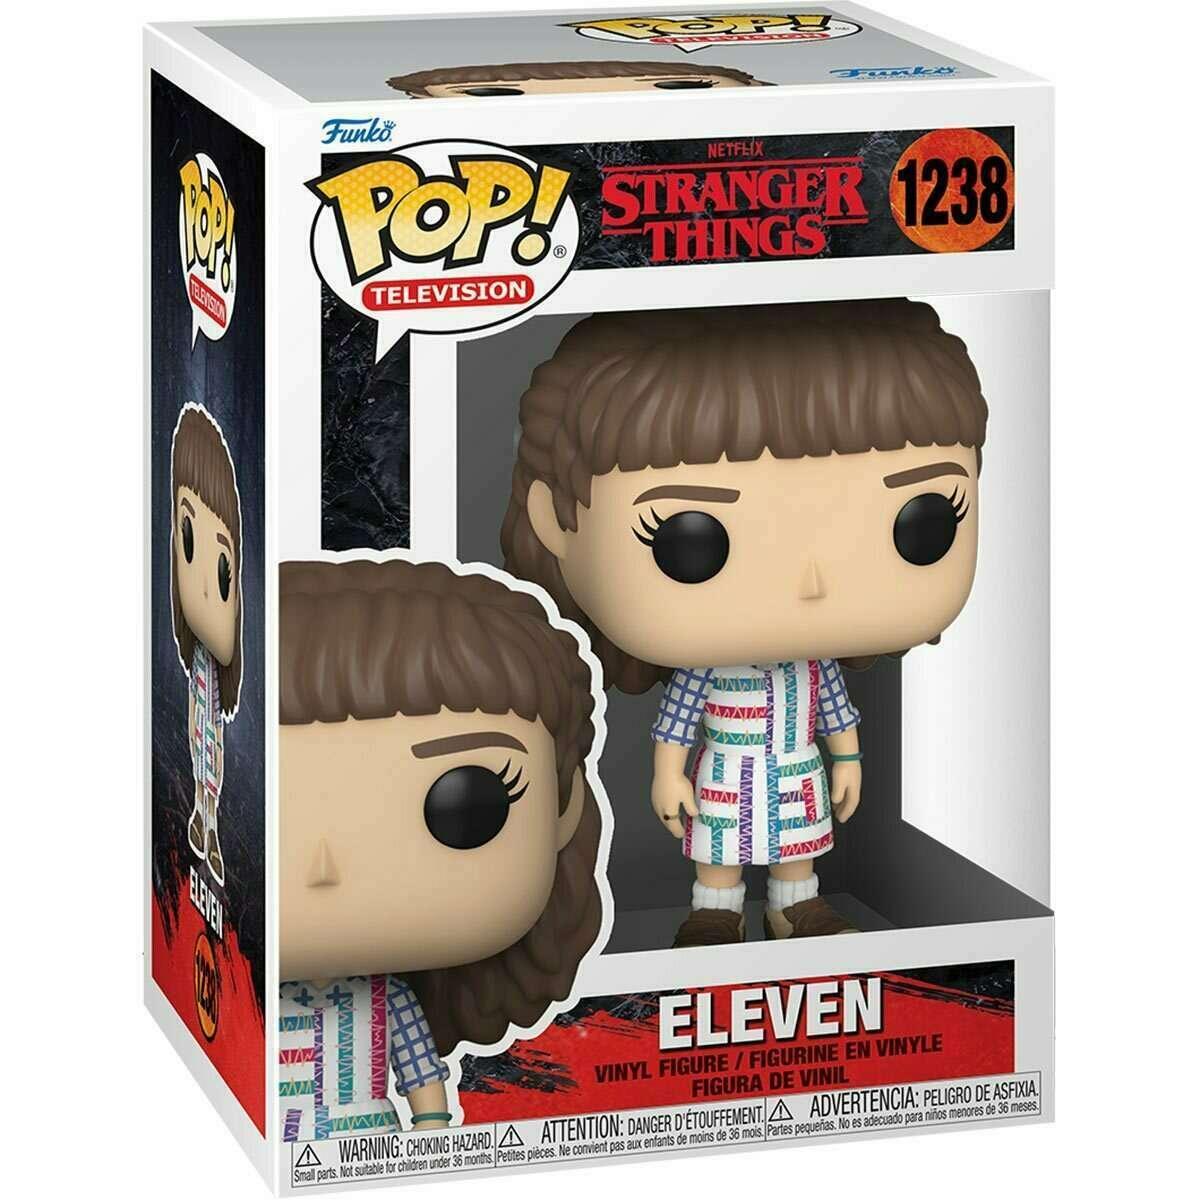 Pop! Television - Stranger Things - Eleven - #1238 - Hobby Champion Inc